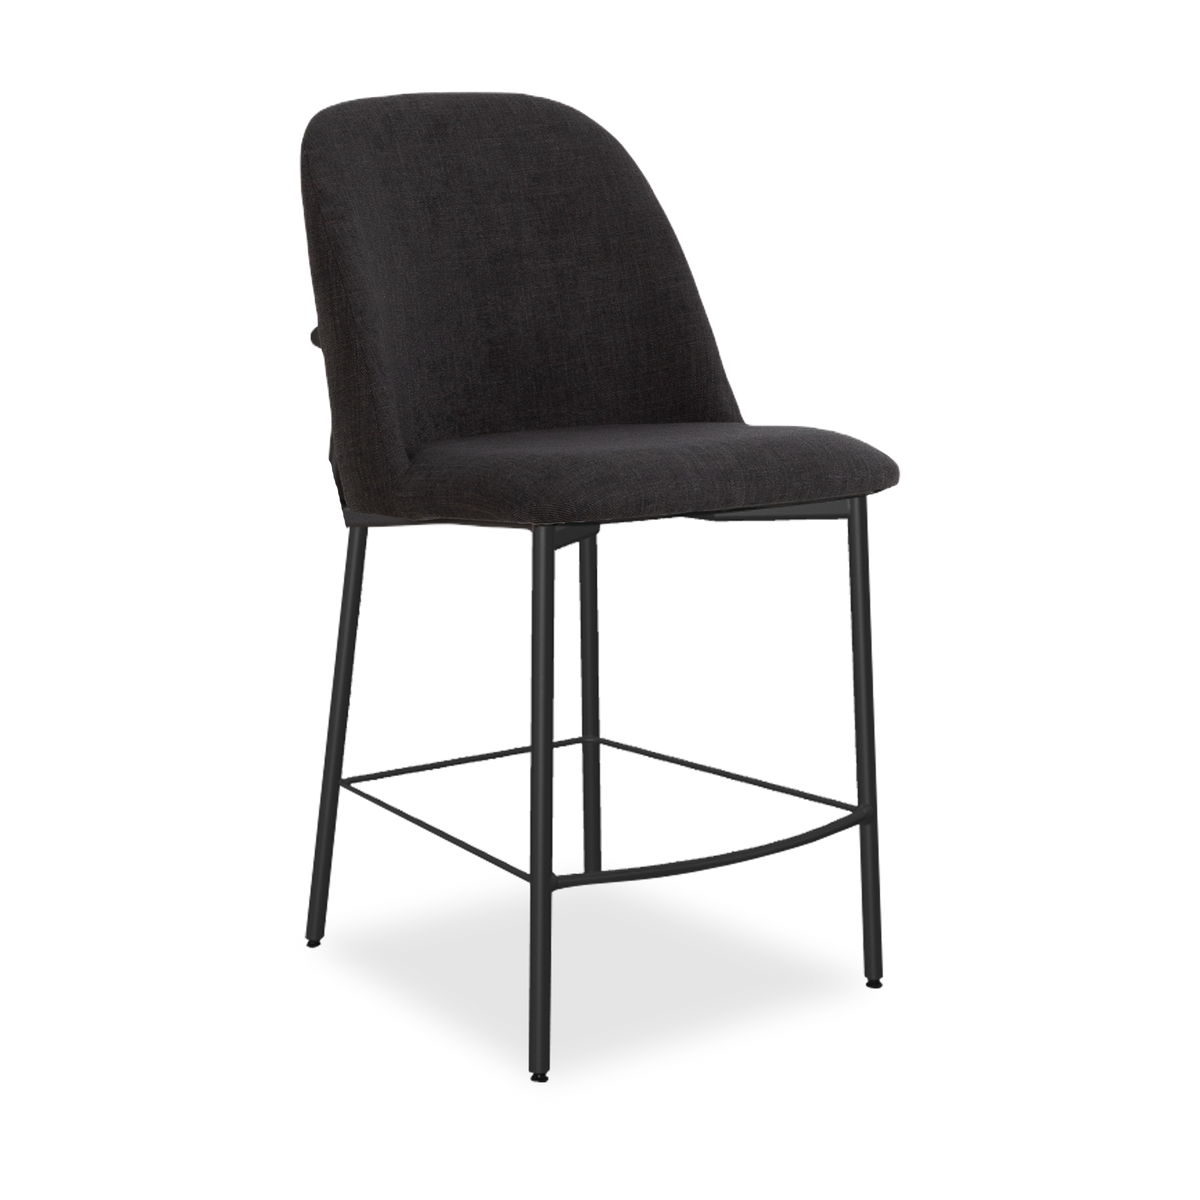 Add chic comfort to your dining space with the Weaver Side Chair.